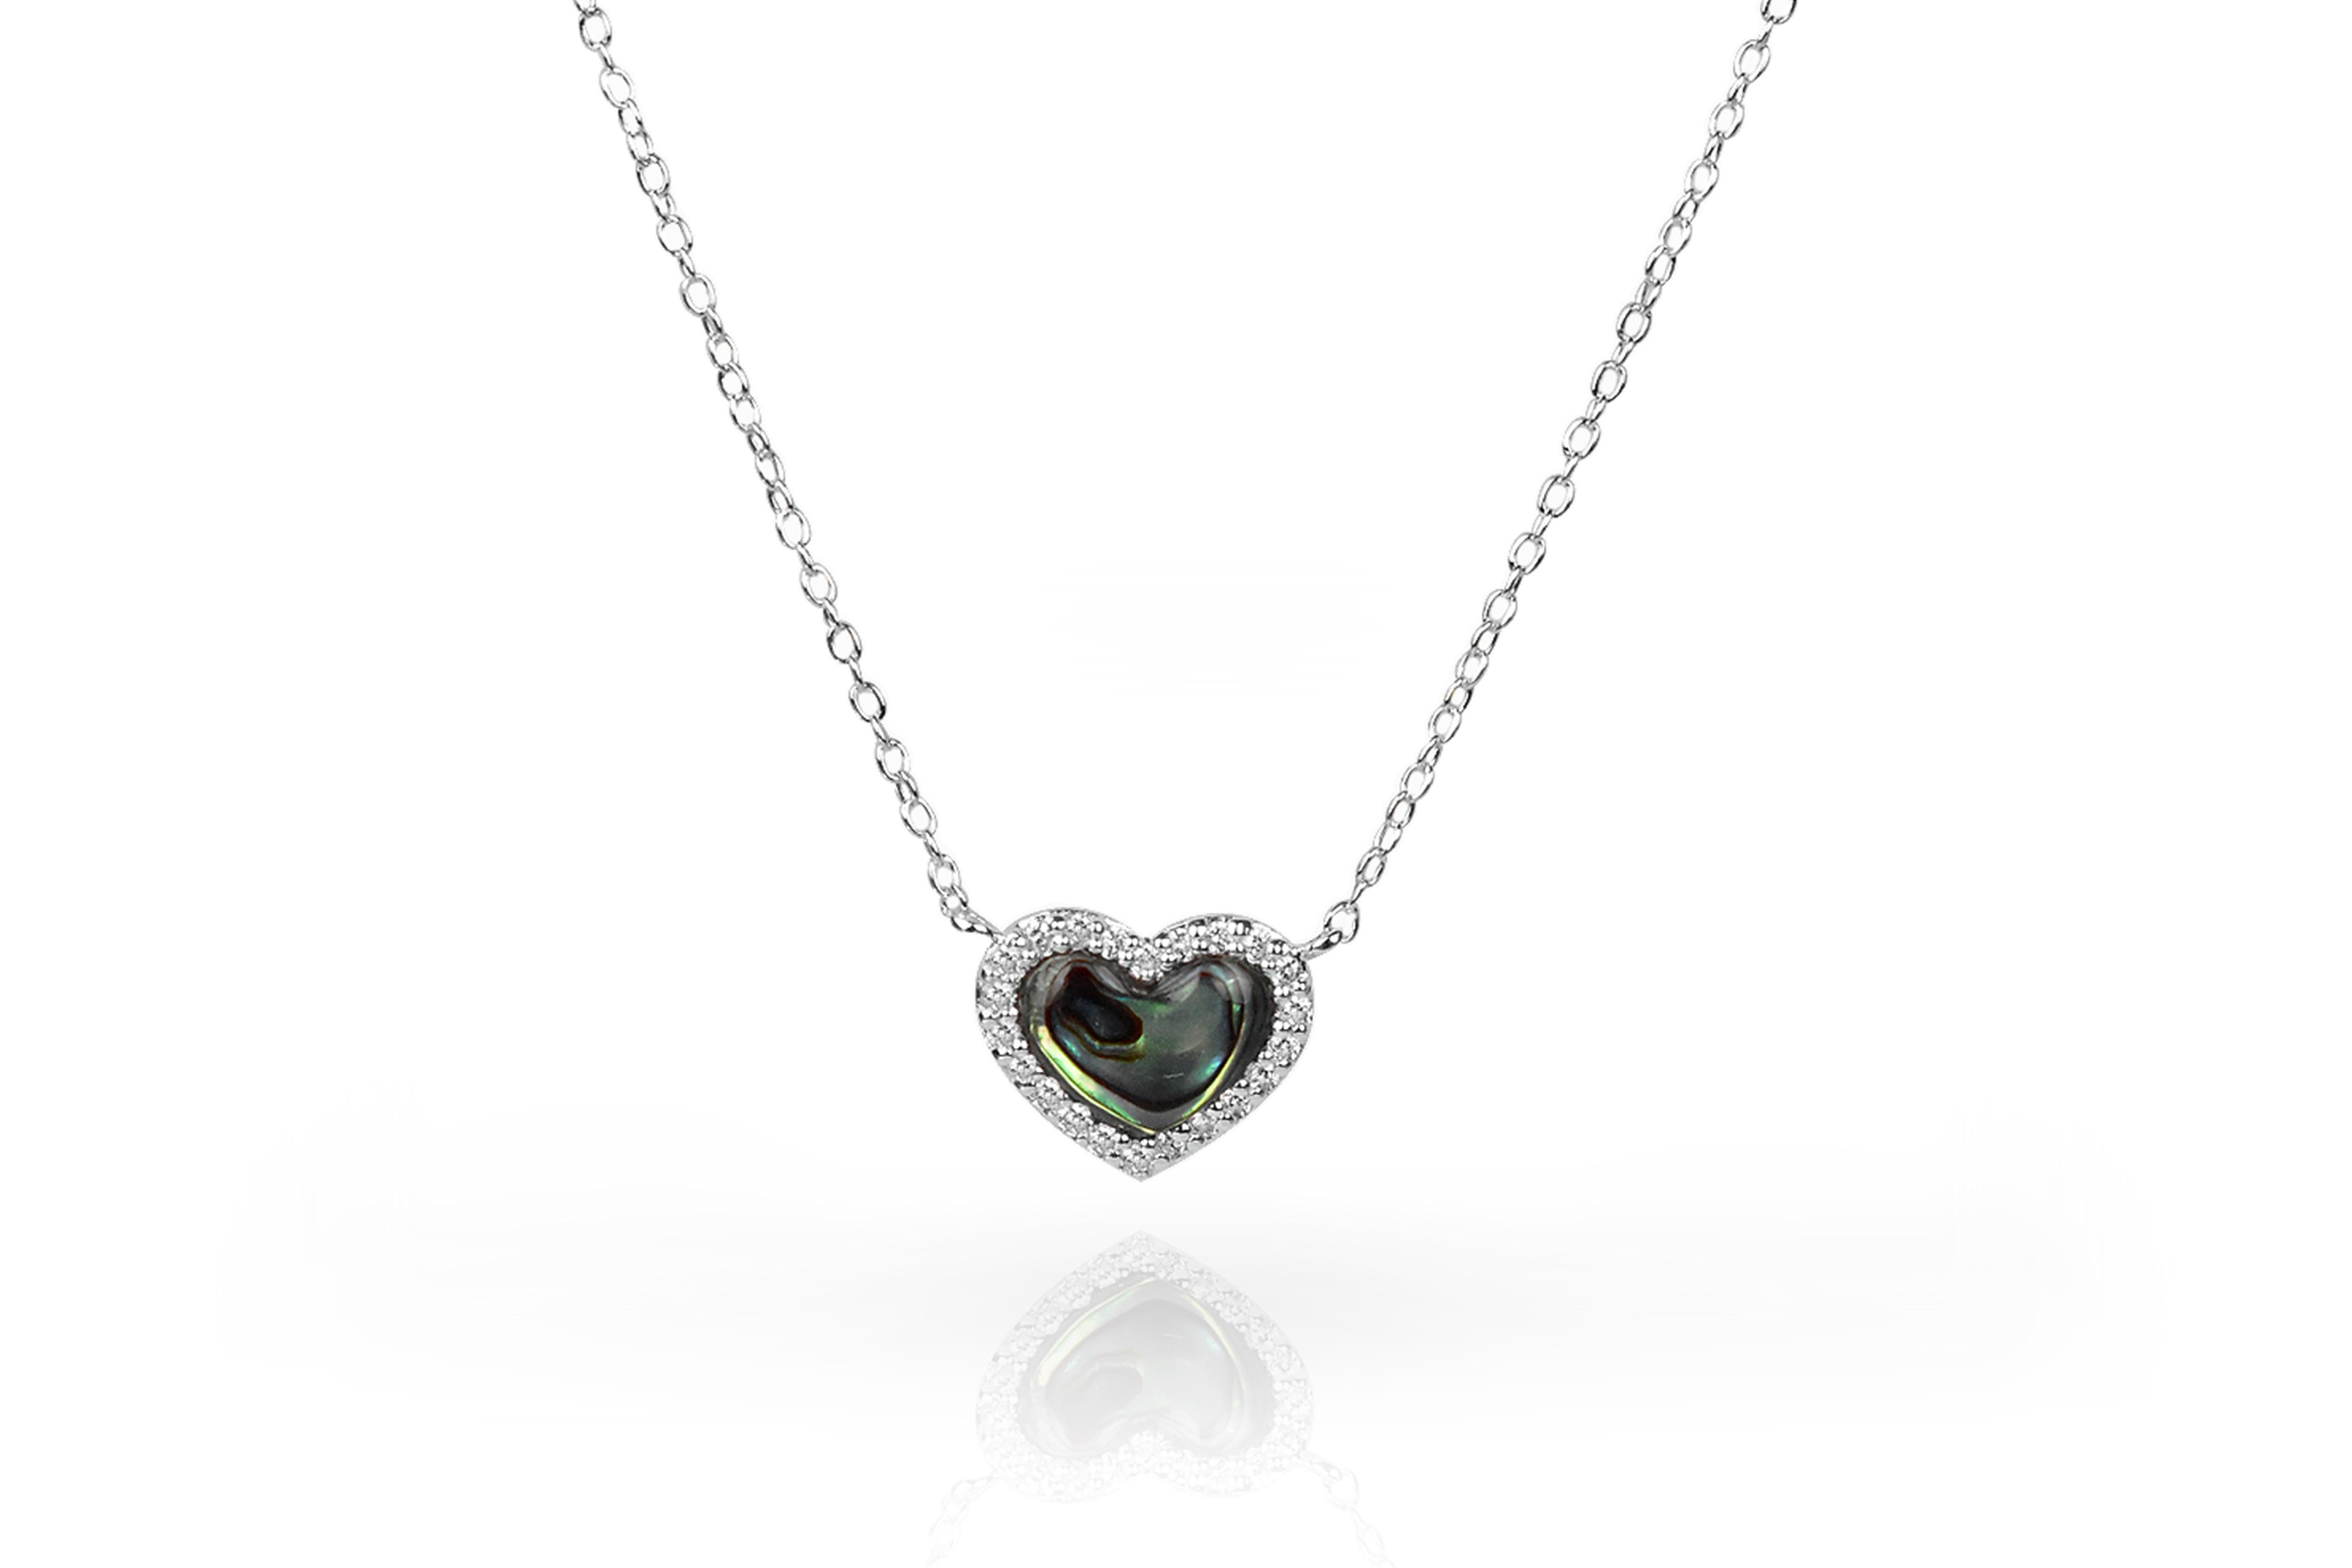 Gemstone Heart Necklace 8.78 mm. x 11.08 mm. is made of 10k solid gold available in three colors of gold and four options of gemstone.
Gold: White Gold / Rose Gold / Yellow Gold.
Gemstone: Abalone / Tahitian Black MOP / White MOP / Pink